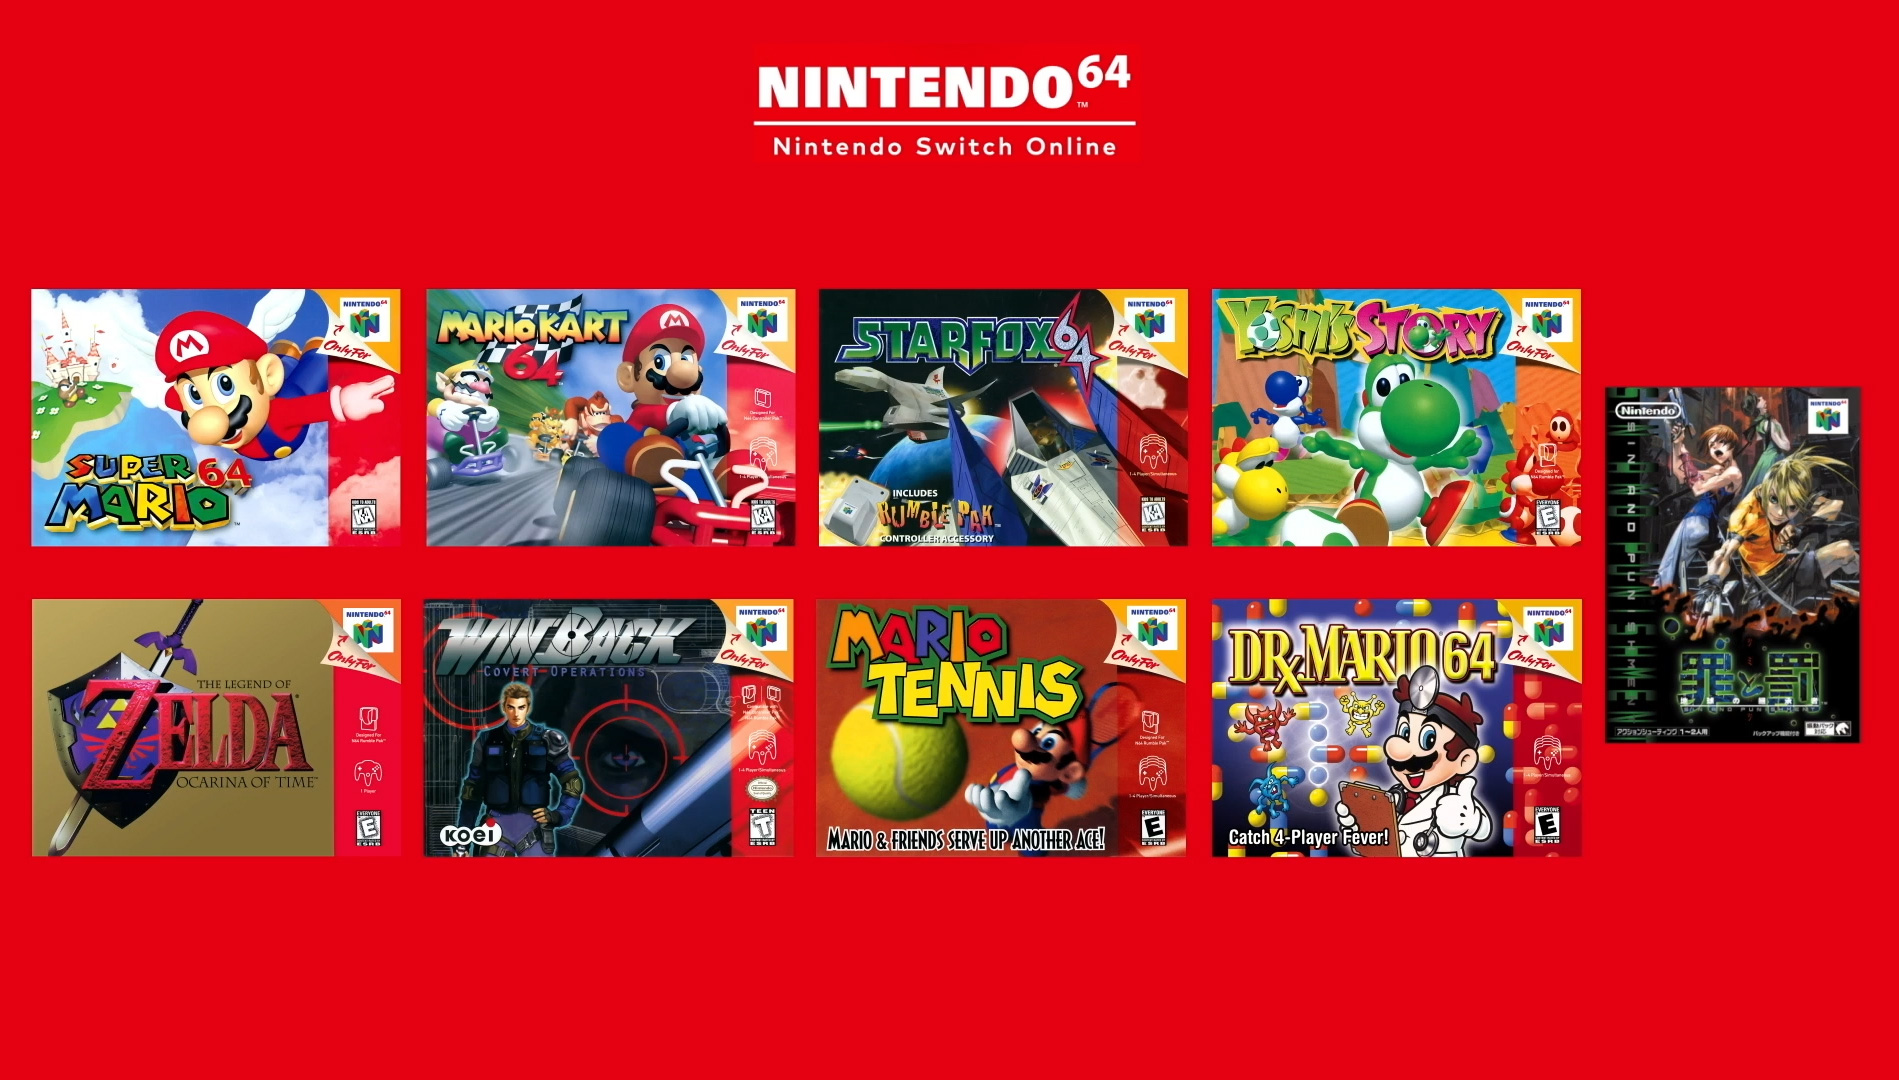 Nintendo 64 Games Reportedly Coming to Nintendo Switch Online